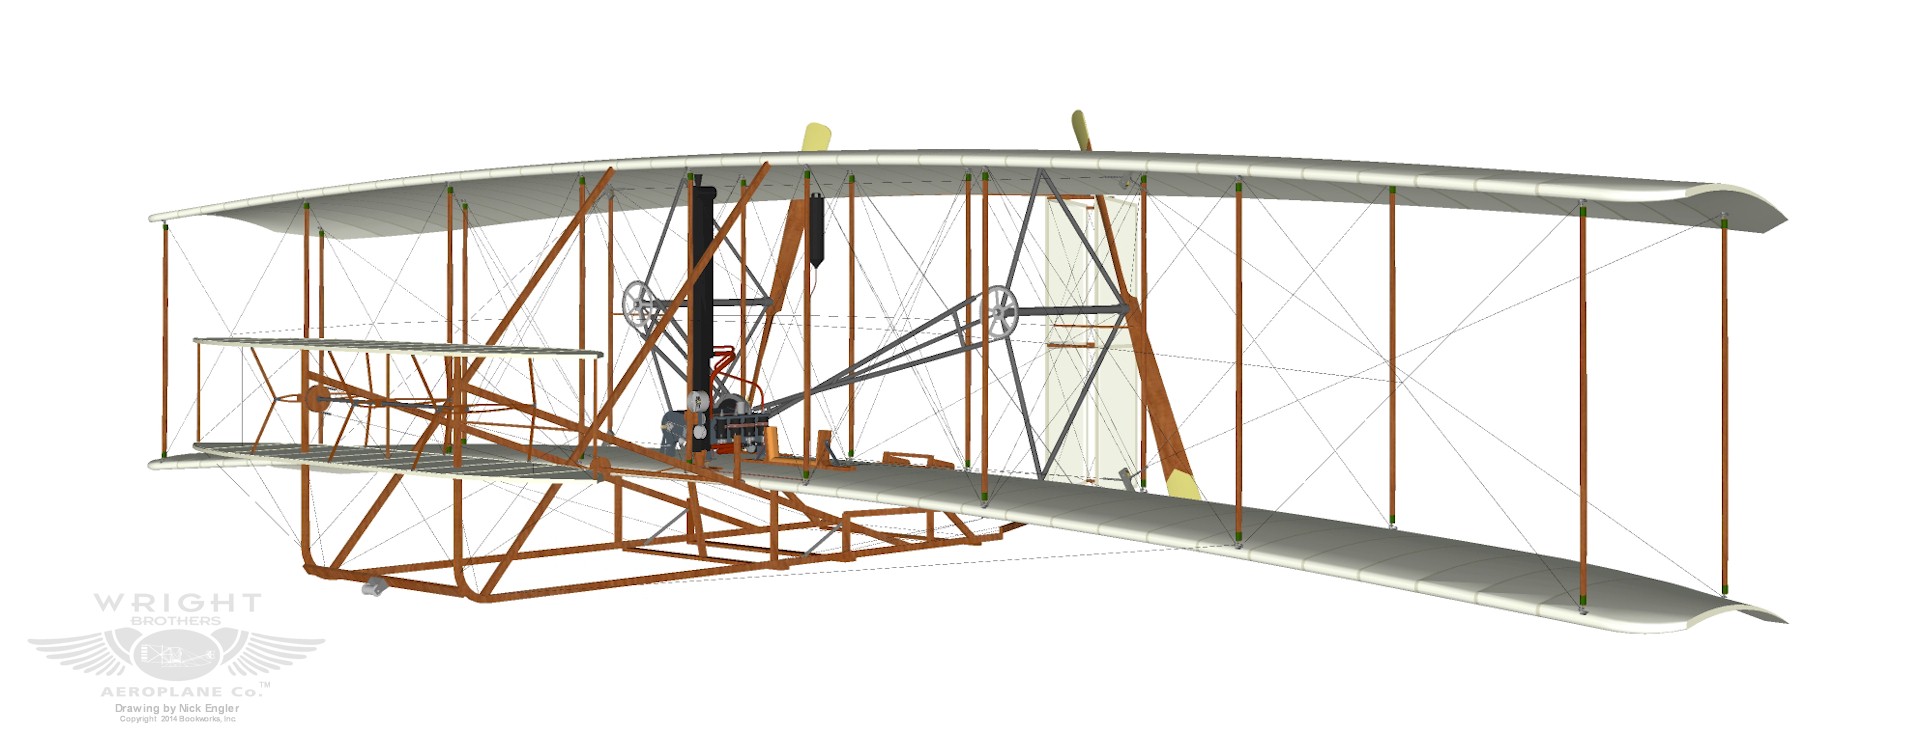 wright flyer clipart - photo #42